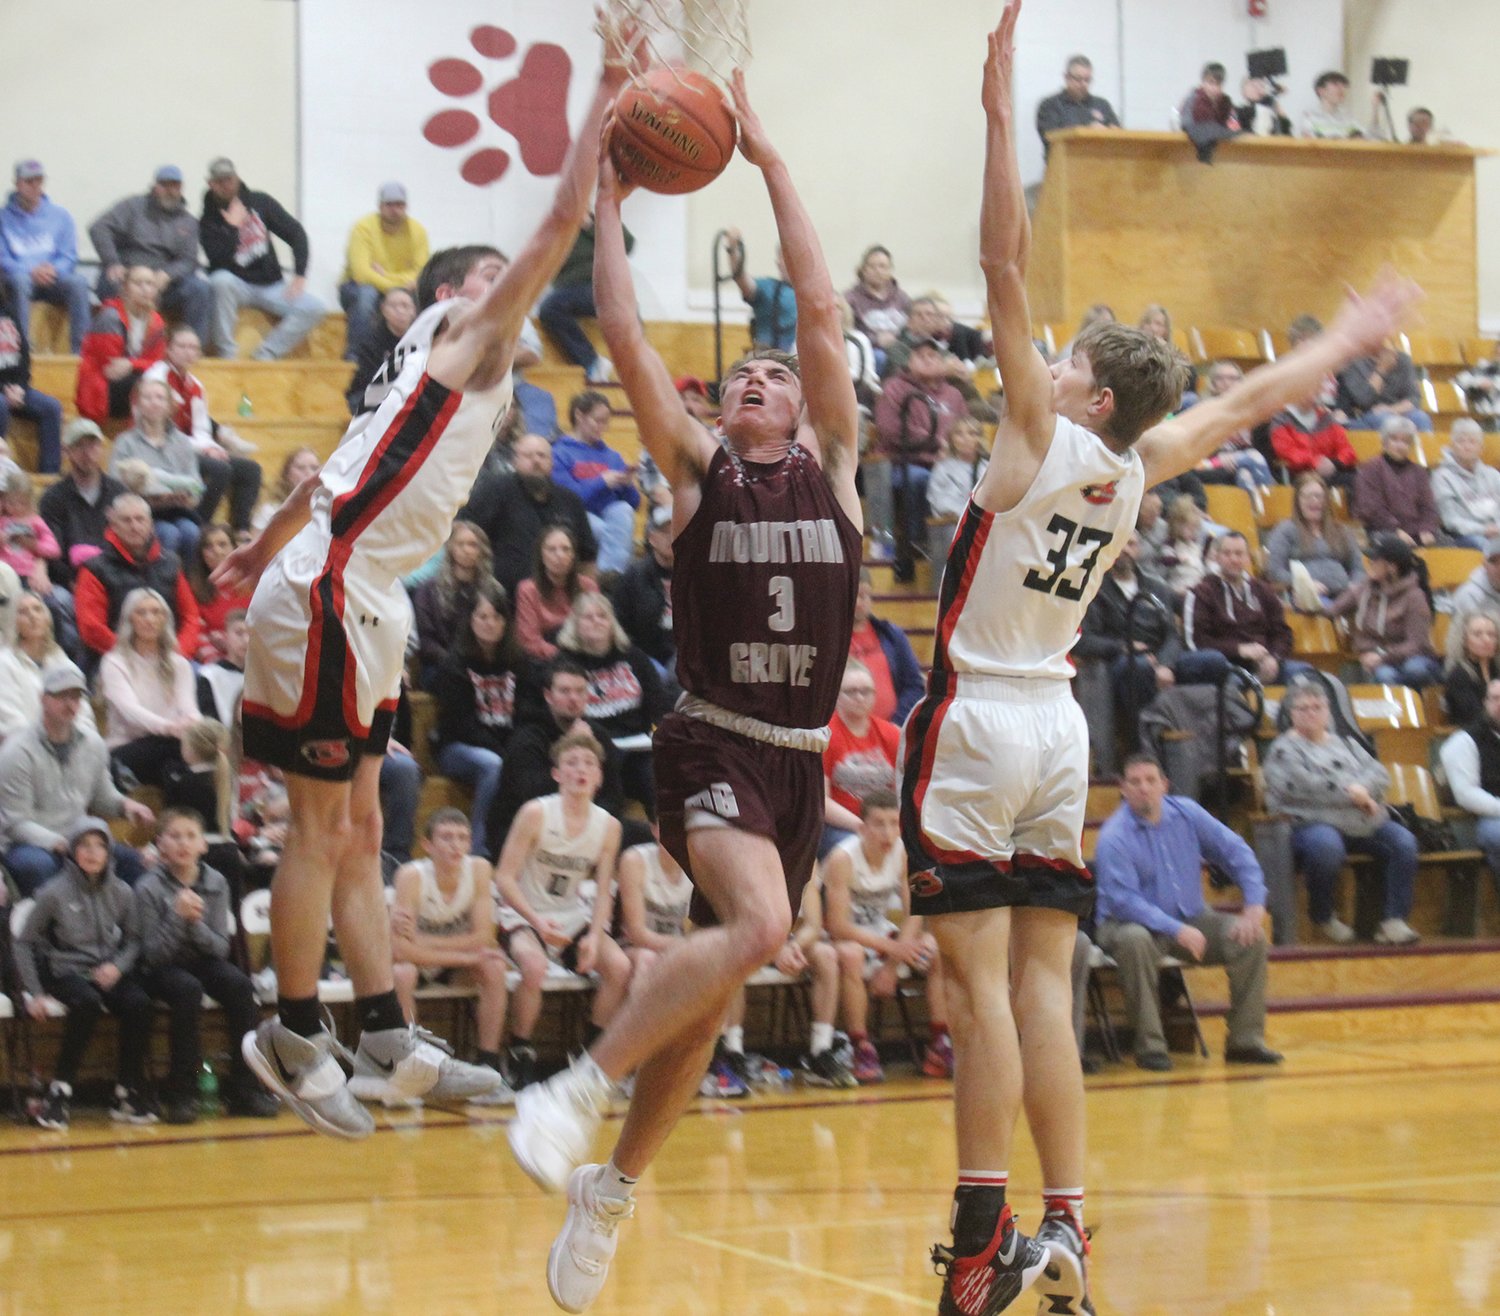 Mountain Grove’s Hollen Glenn gets fouled on this shot during a rough Chadwick game in The Seymour Bank’s Winter Classic. Game featured 51 turnovers.